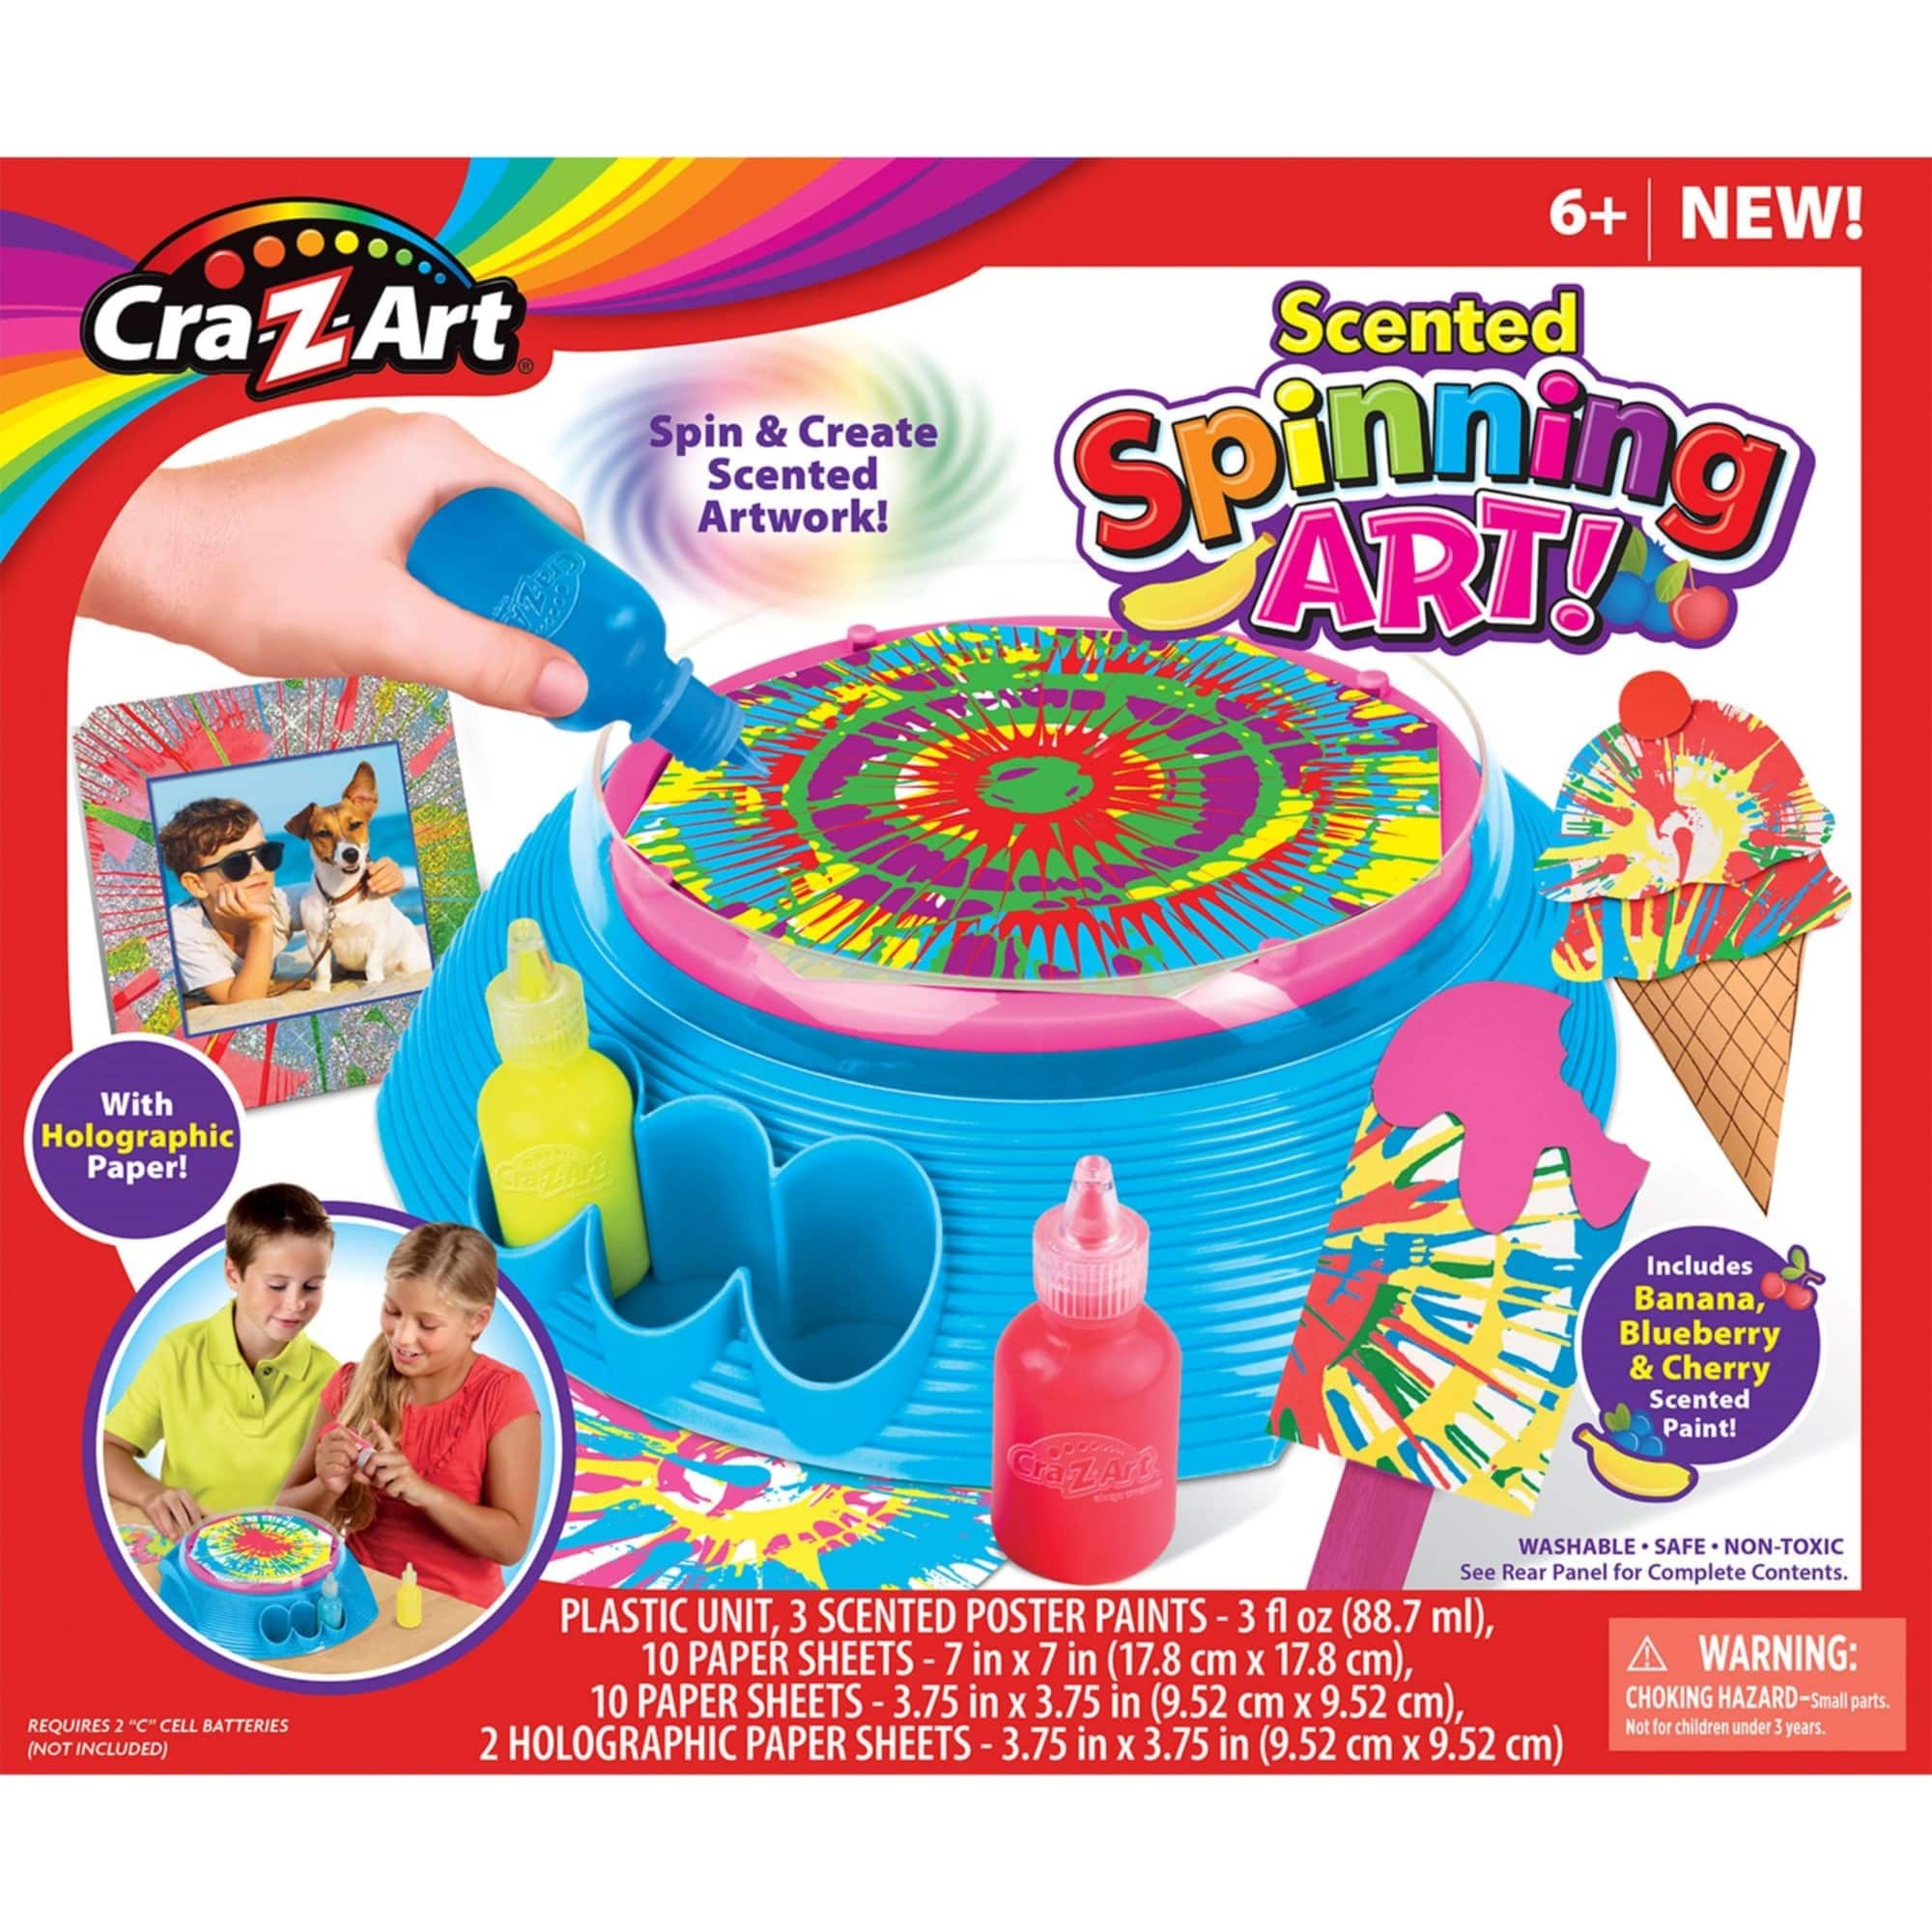 Creative Spin Art Experience